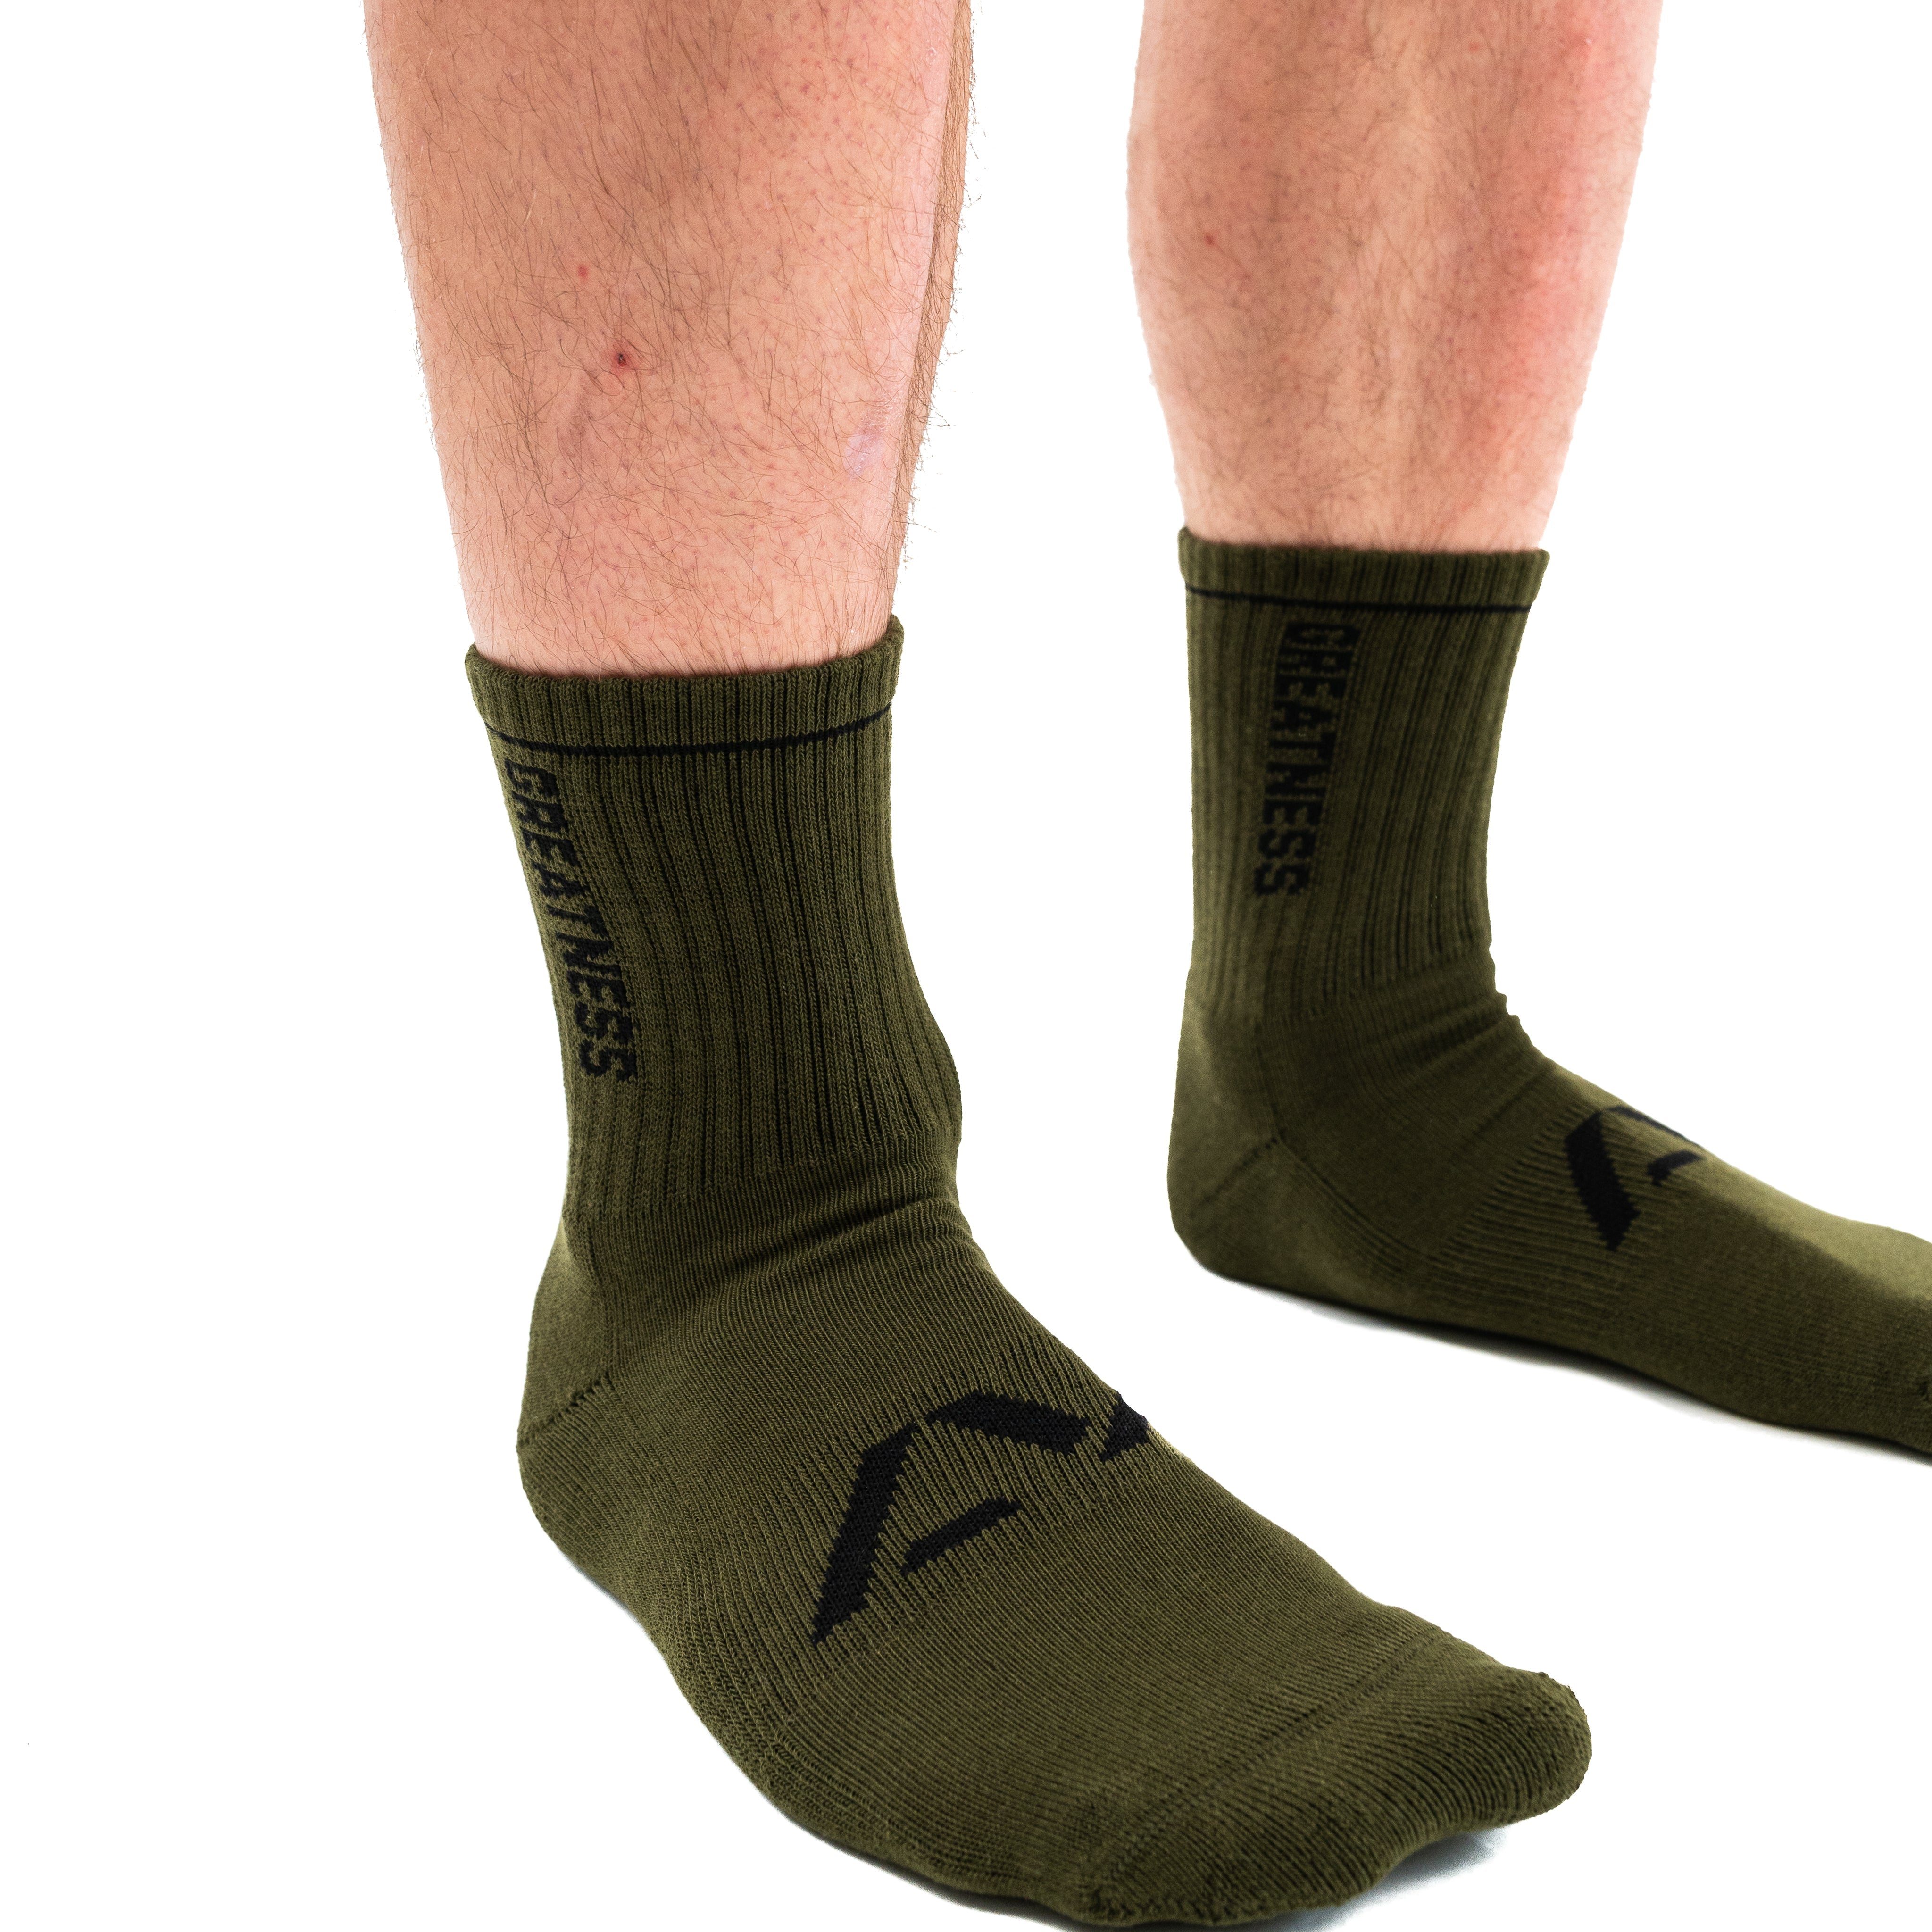 Your feet are important and durable crew socks are just as importing when out and about or in the gym. These military crew socks have a cushioned footbed, arch support and light compression of the ankle. A7 Crew socks are IPF Approved so a great addition to your IPF Approved Kit. A7 Crew socks shipping to Europe and the UK, Norway, Switzerland and Iceland.